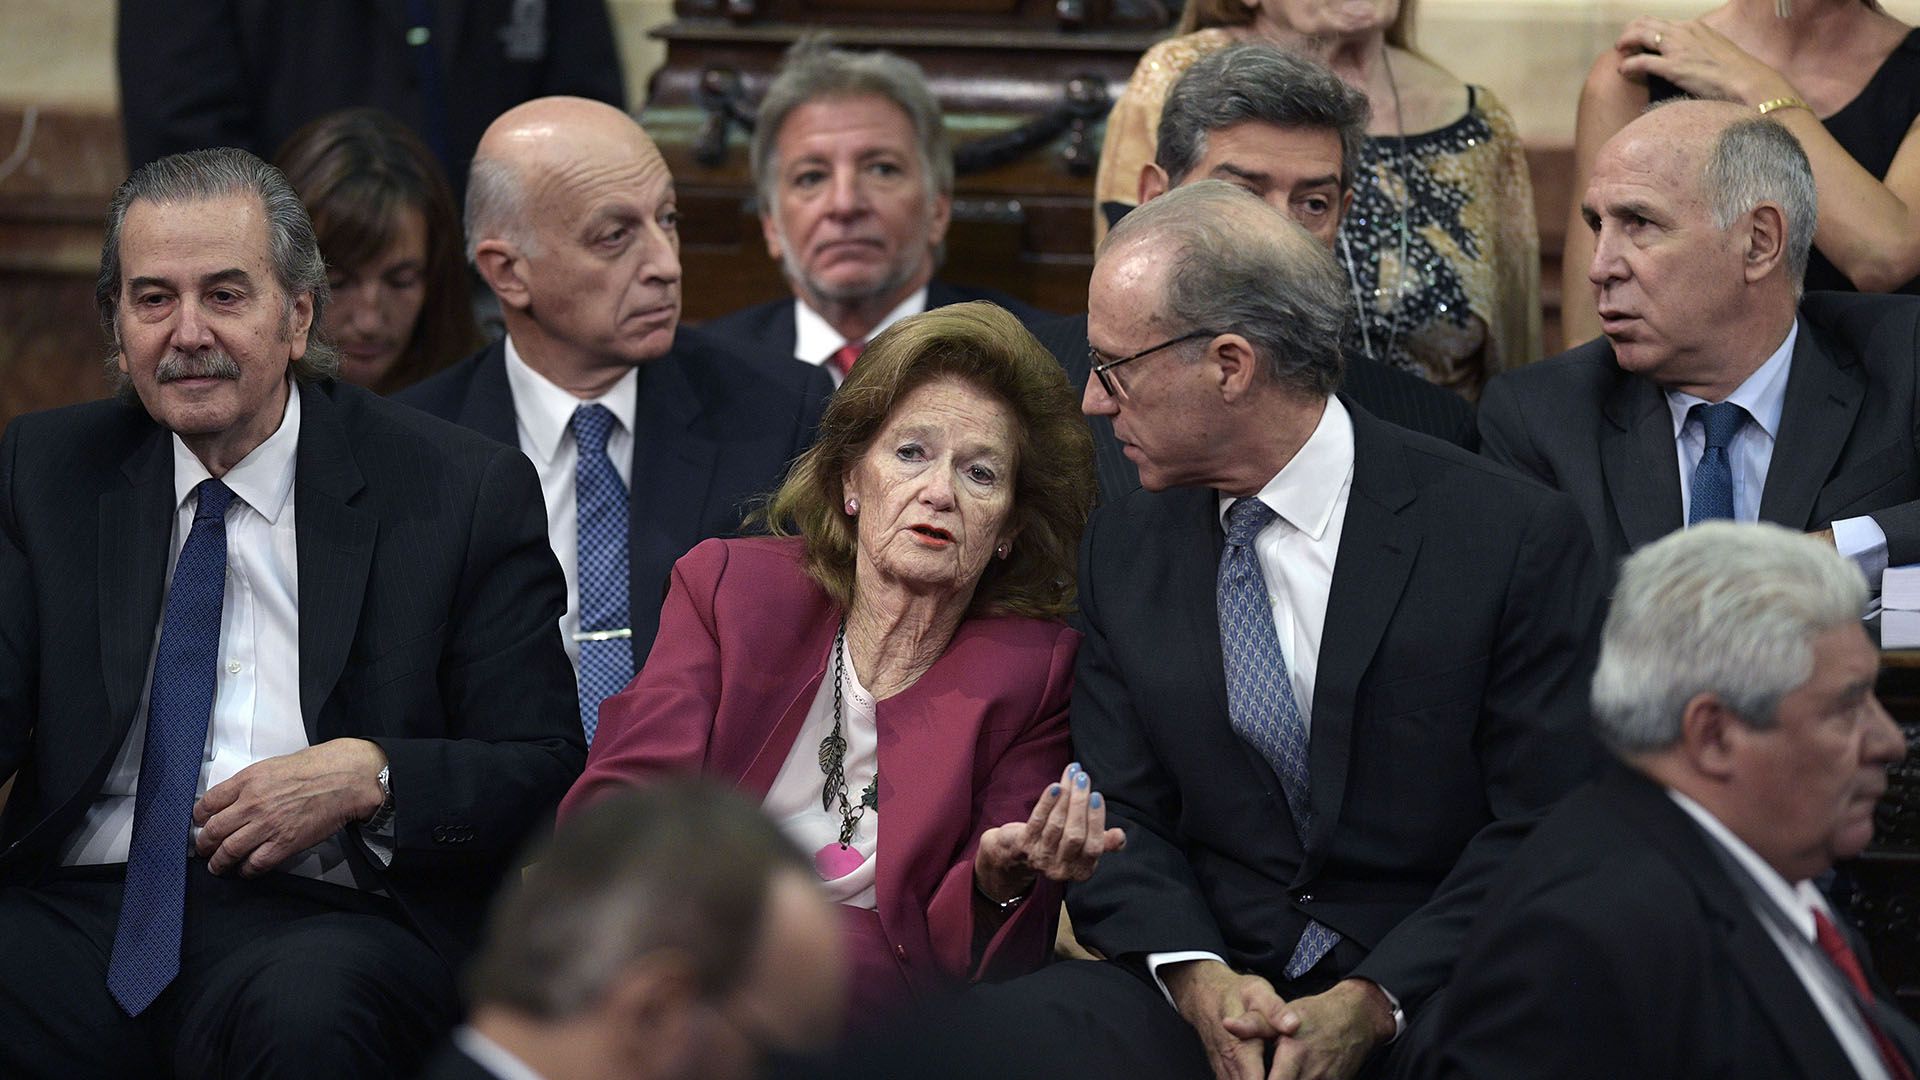 Argentina's Supreme Court members (first row L-R ) judges Juan Carlos Maqueda, Elena Highton de Nolasco and Carlos Rosenkrantz, (back R-L ) judges Ricardo Lorenzetti and Horacio Rosatti (covered), attend the inauguration of the 137th period of ordinary sessions at the Congress in Buenos Aires, Argentina on March 1, 2019. (Photo by JUAN MABROMATA / AFP)